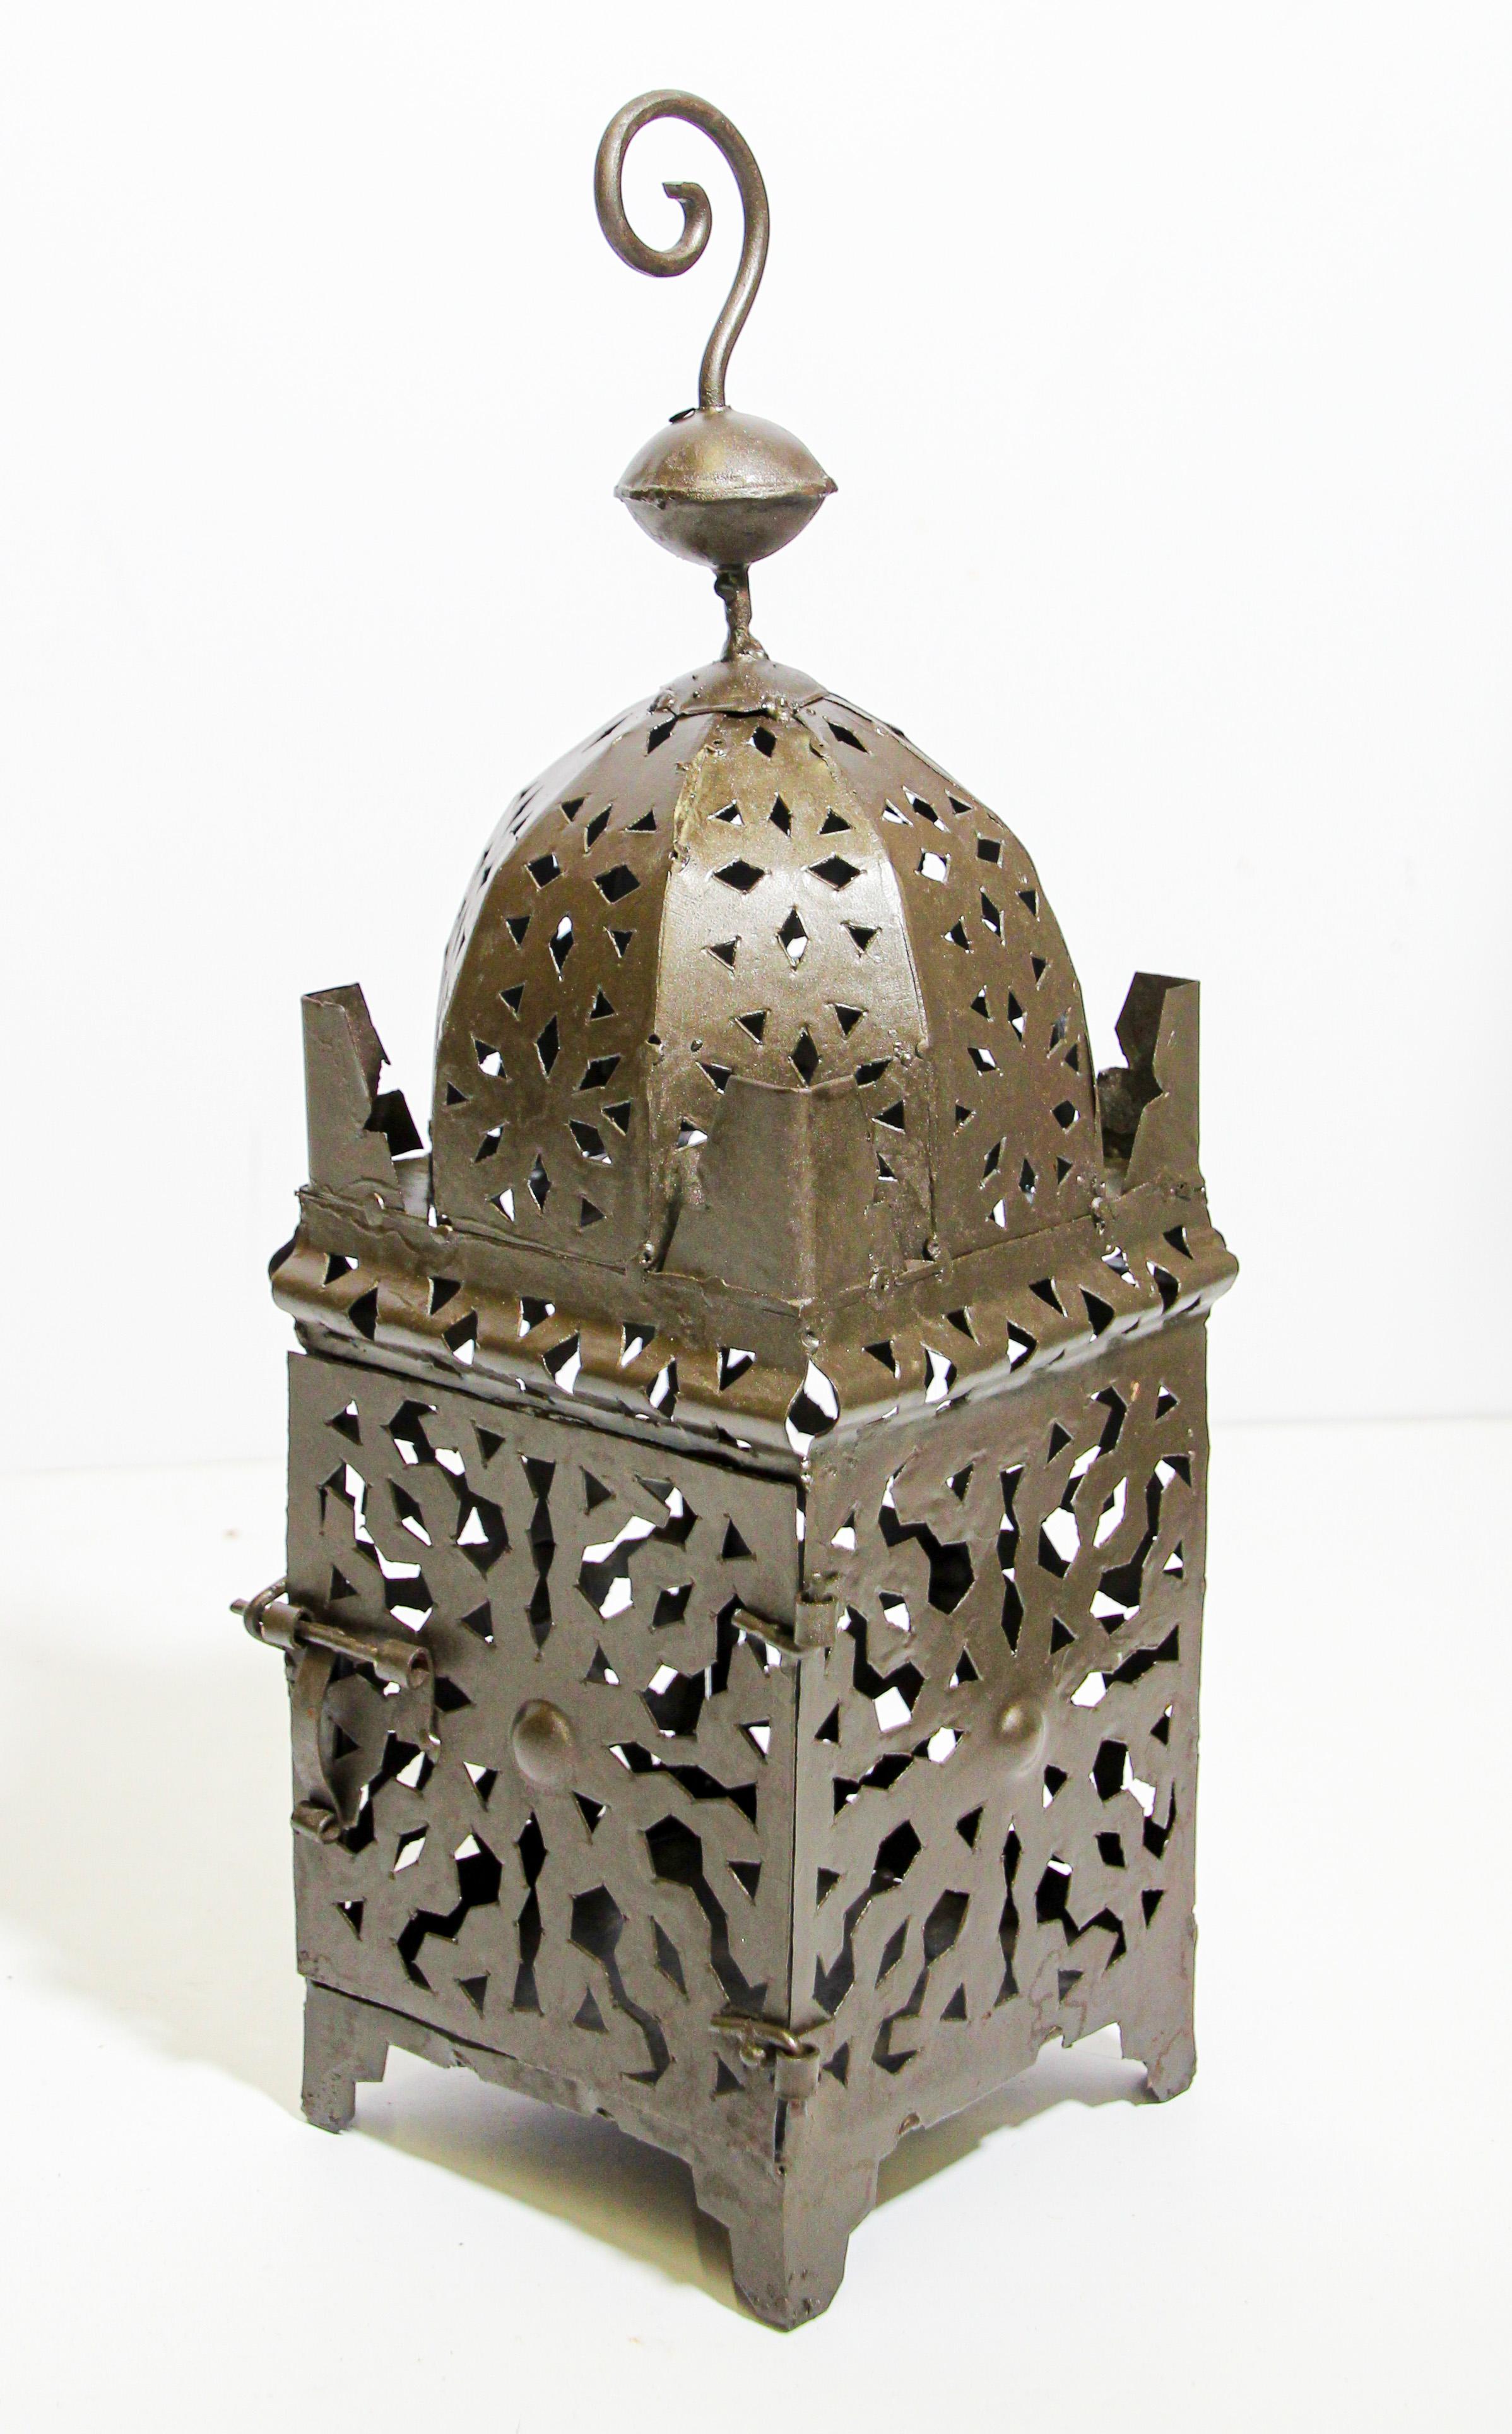 Moroccan Moorish metal candle lantern with open metal work Moorish design.
Hurricane candle lamp handcrafted in Morocco by artisans, metal handcut and hammered with Moorish design, open in front for use with pillar candles.
The lantern has a small